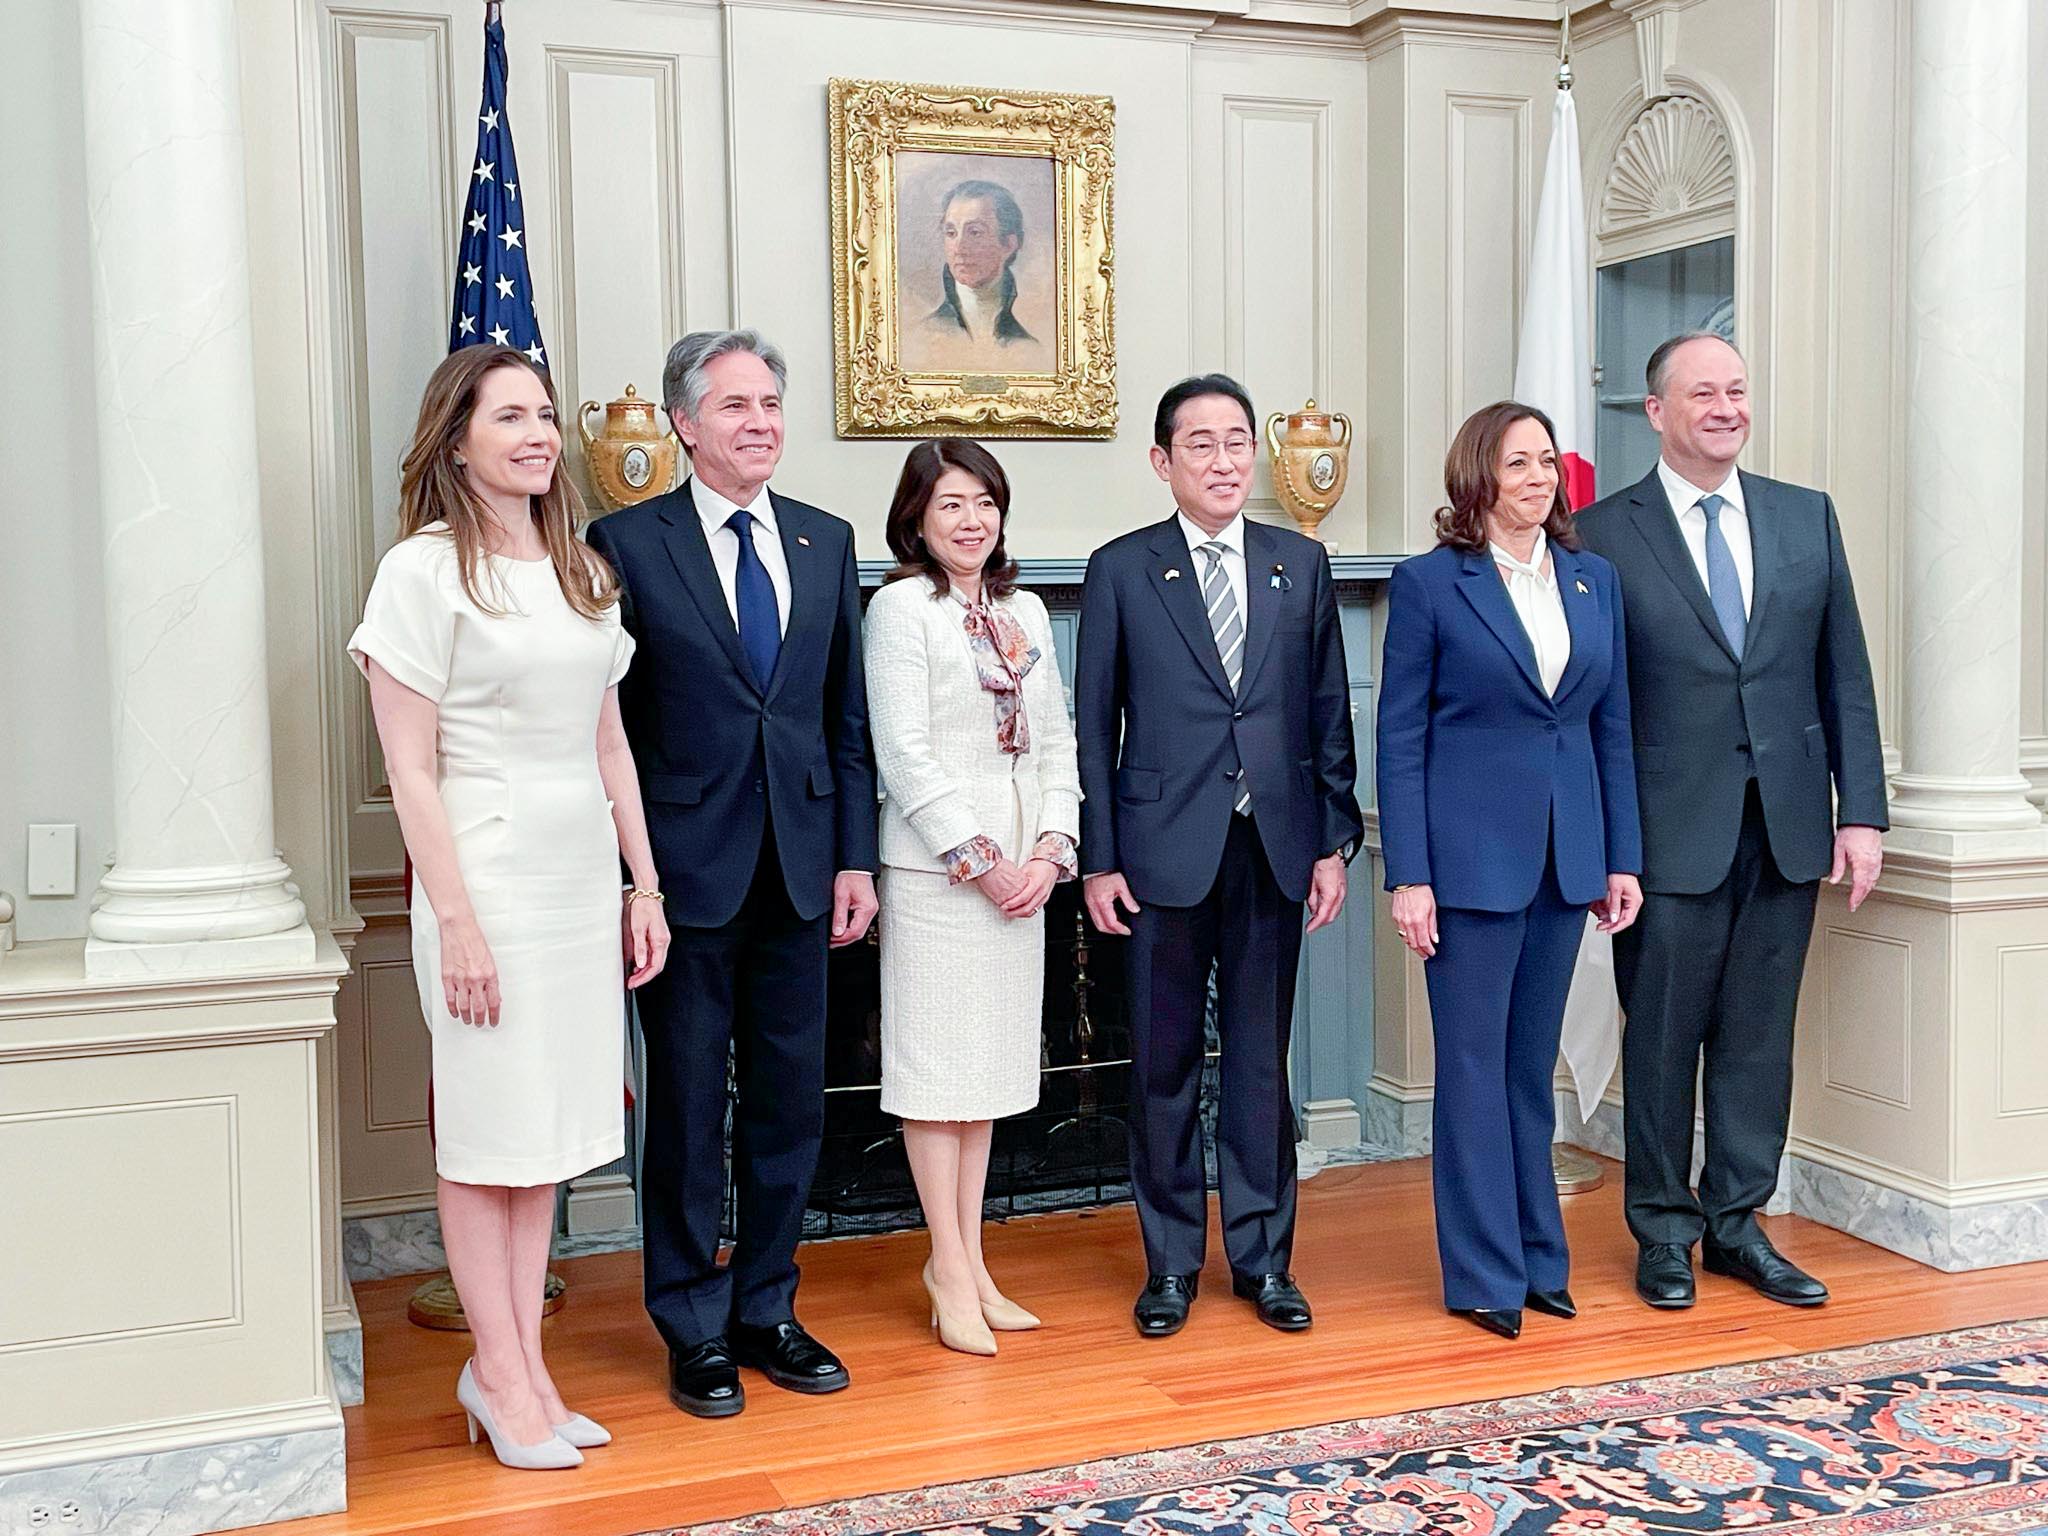 State Luncheon hosted by Vice President Harris and Secretary of State Blinken